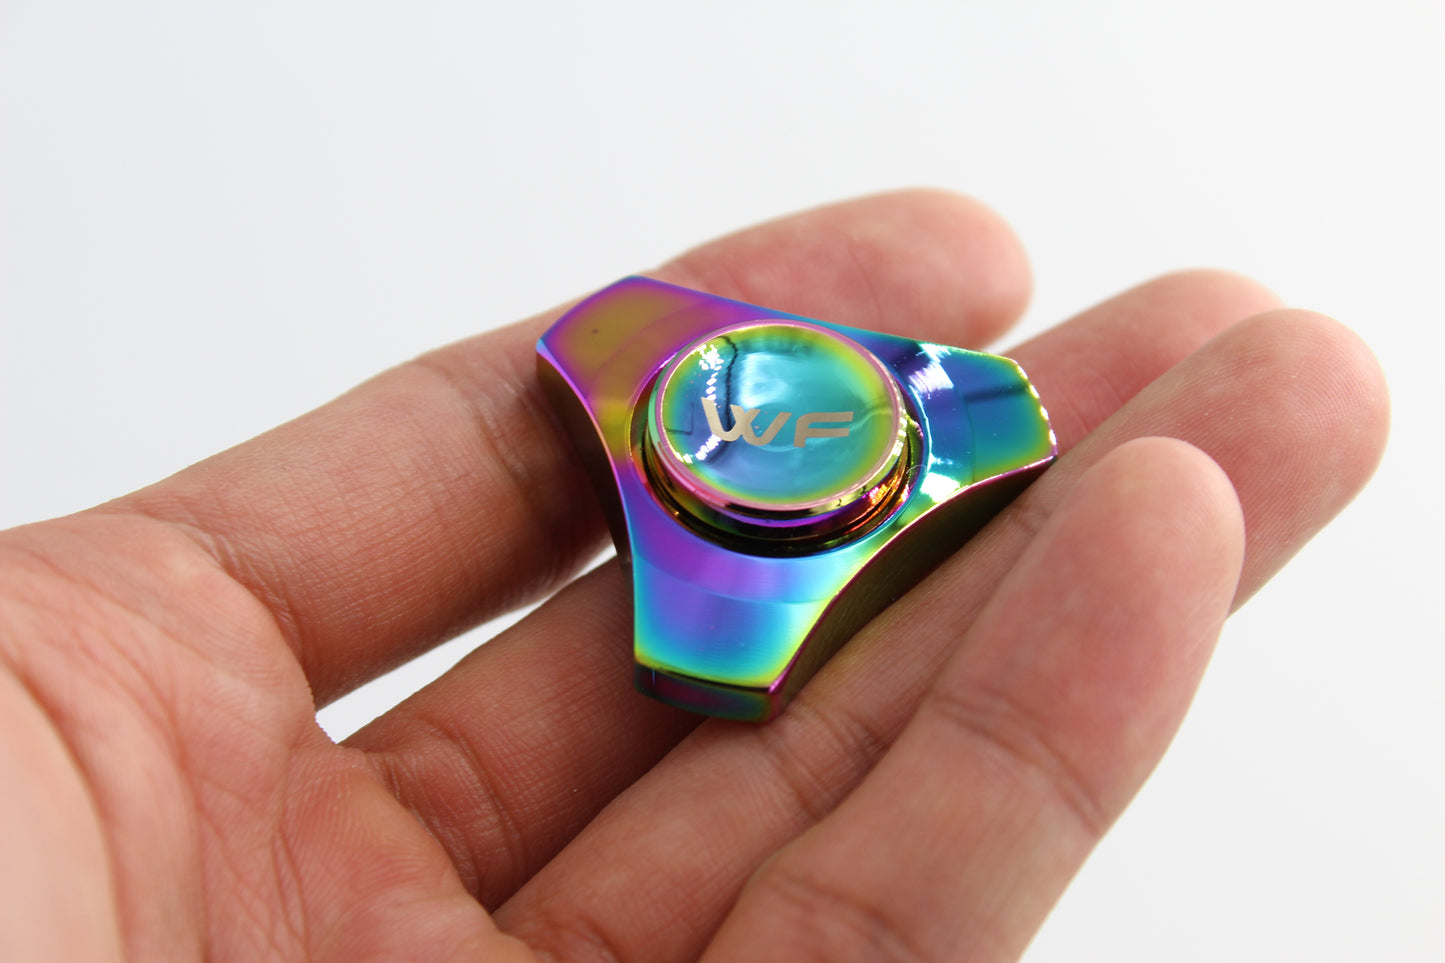 WeFidget's Original Trinity Fidget Spinner, 4-5 Minute Spin Time, Portable, Discrete, Silent, Smooth (Rainbow or Black Available)